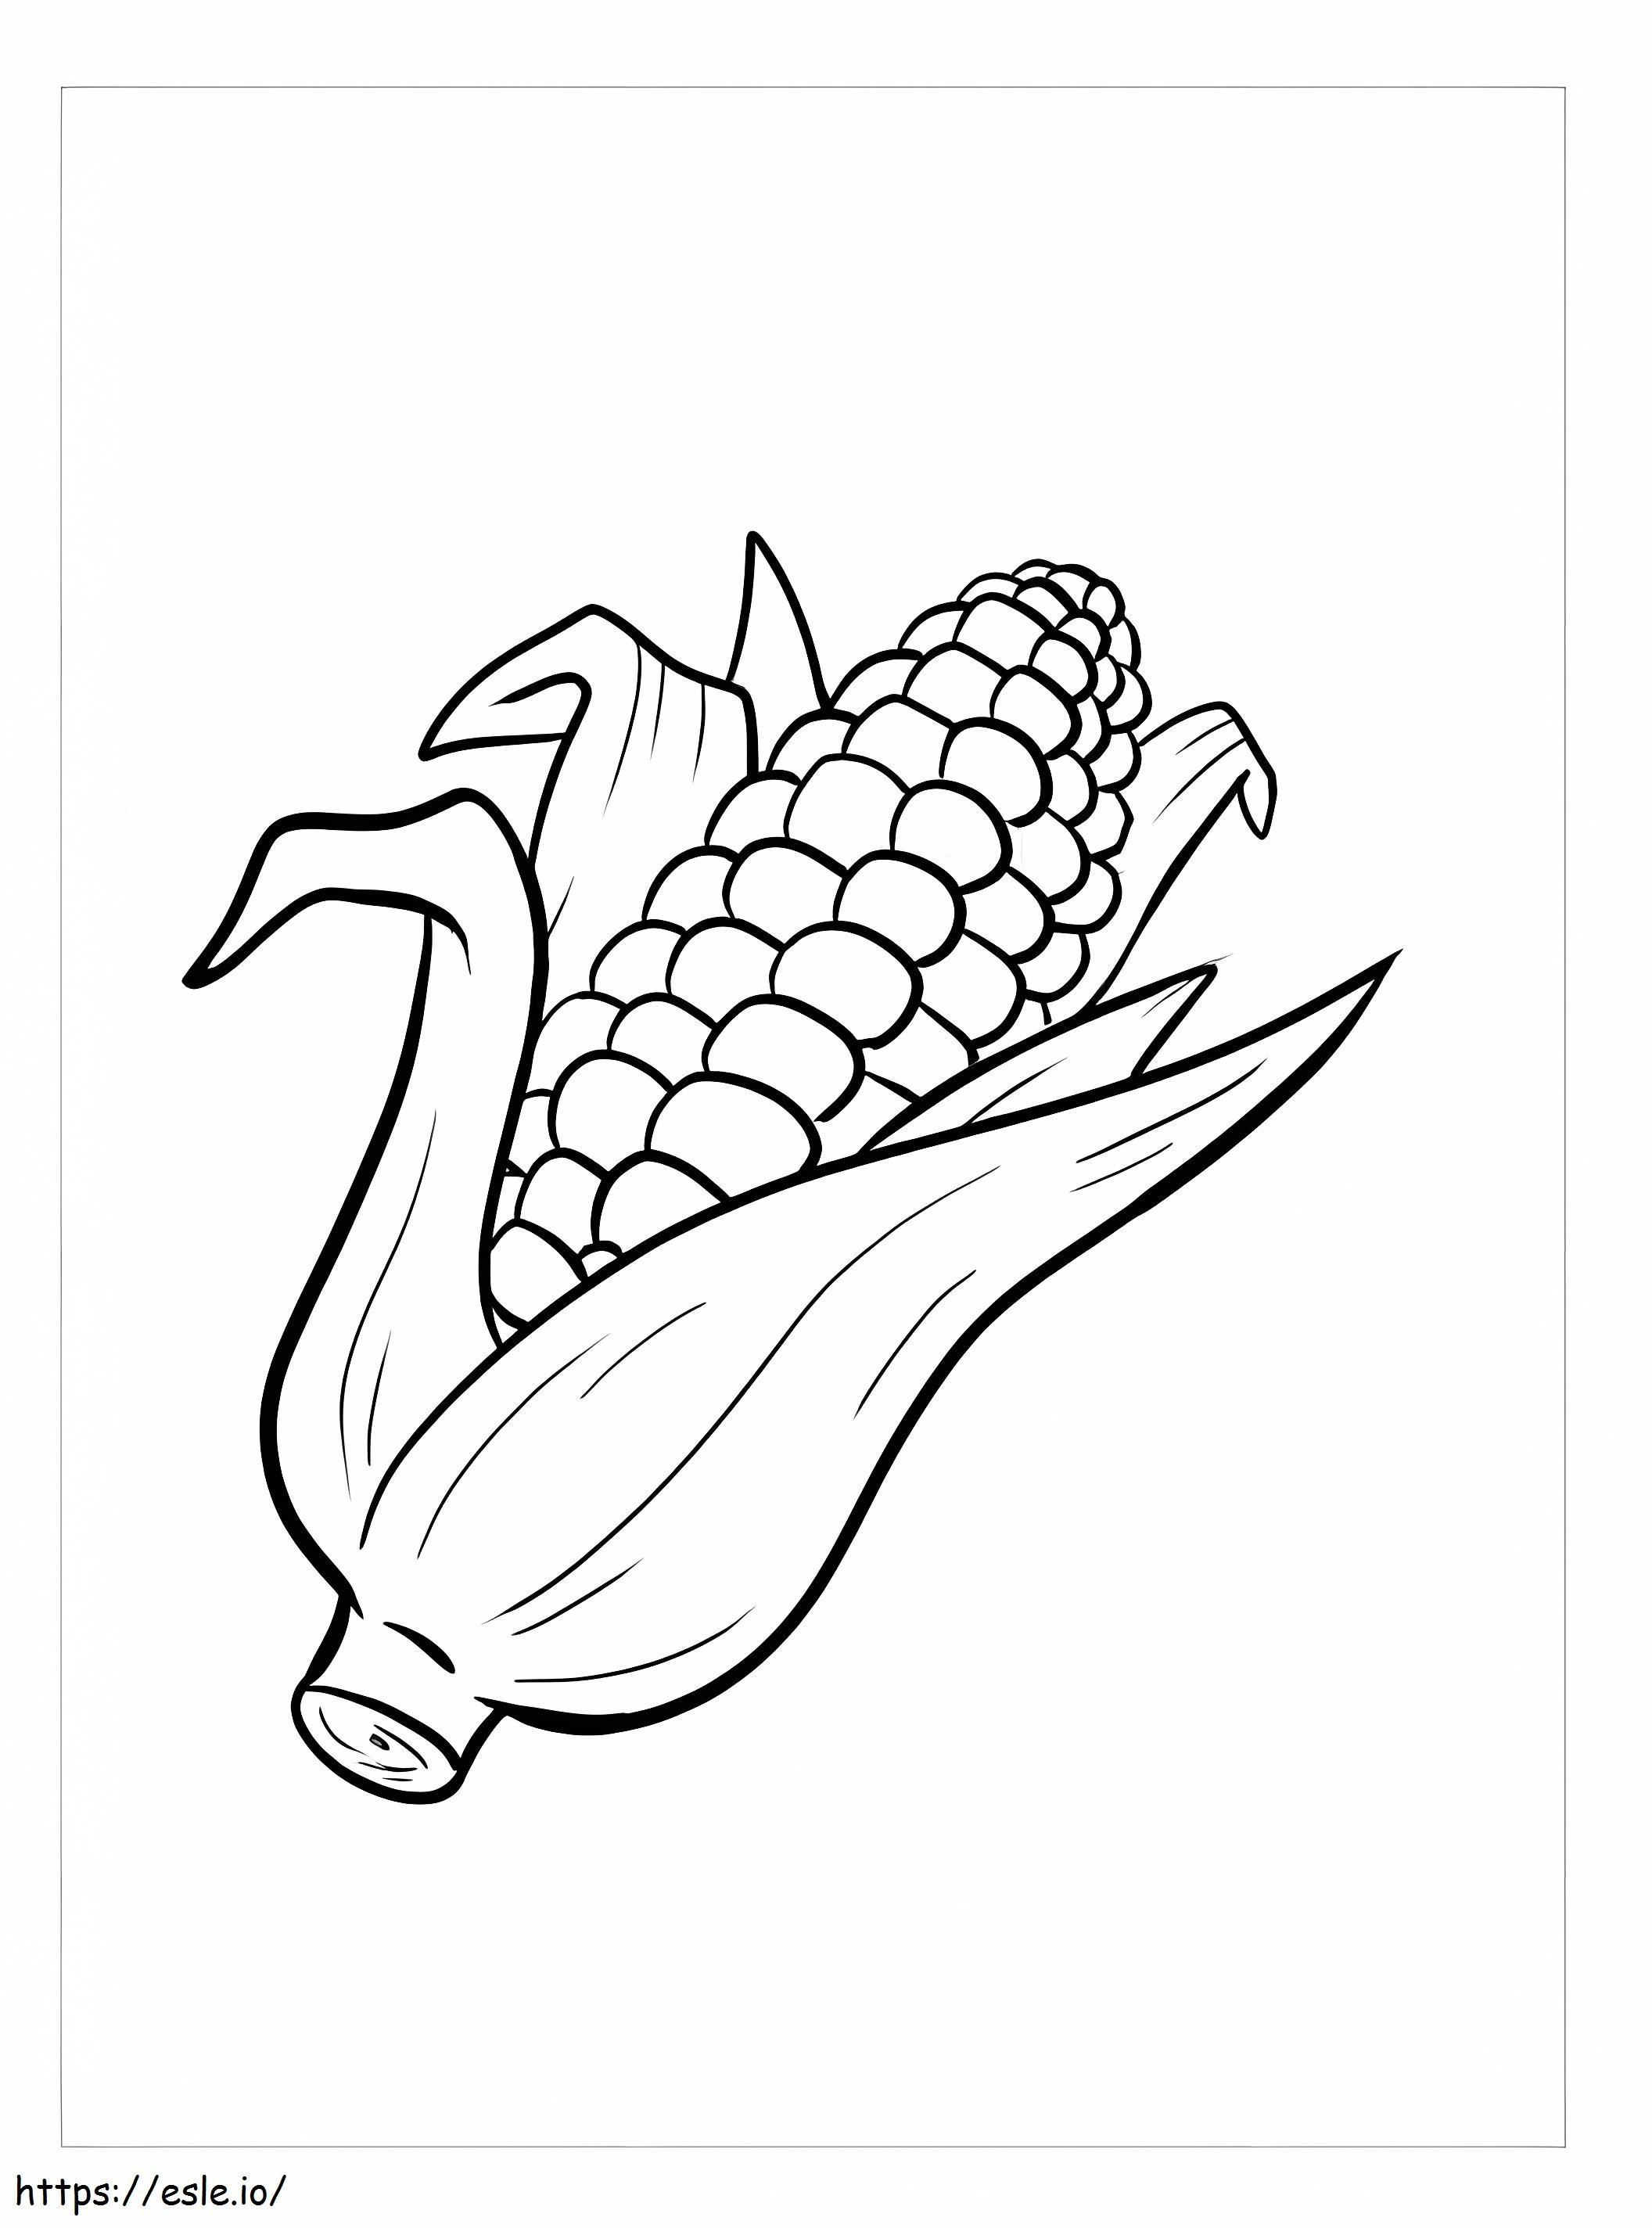 Perfect Corn coloring page